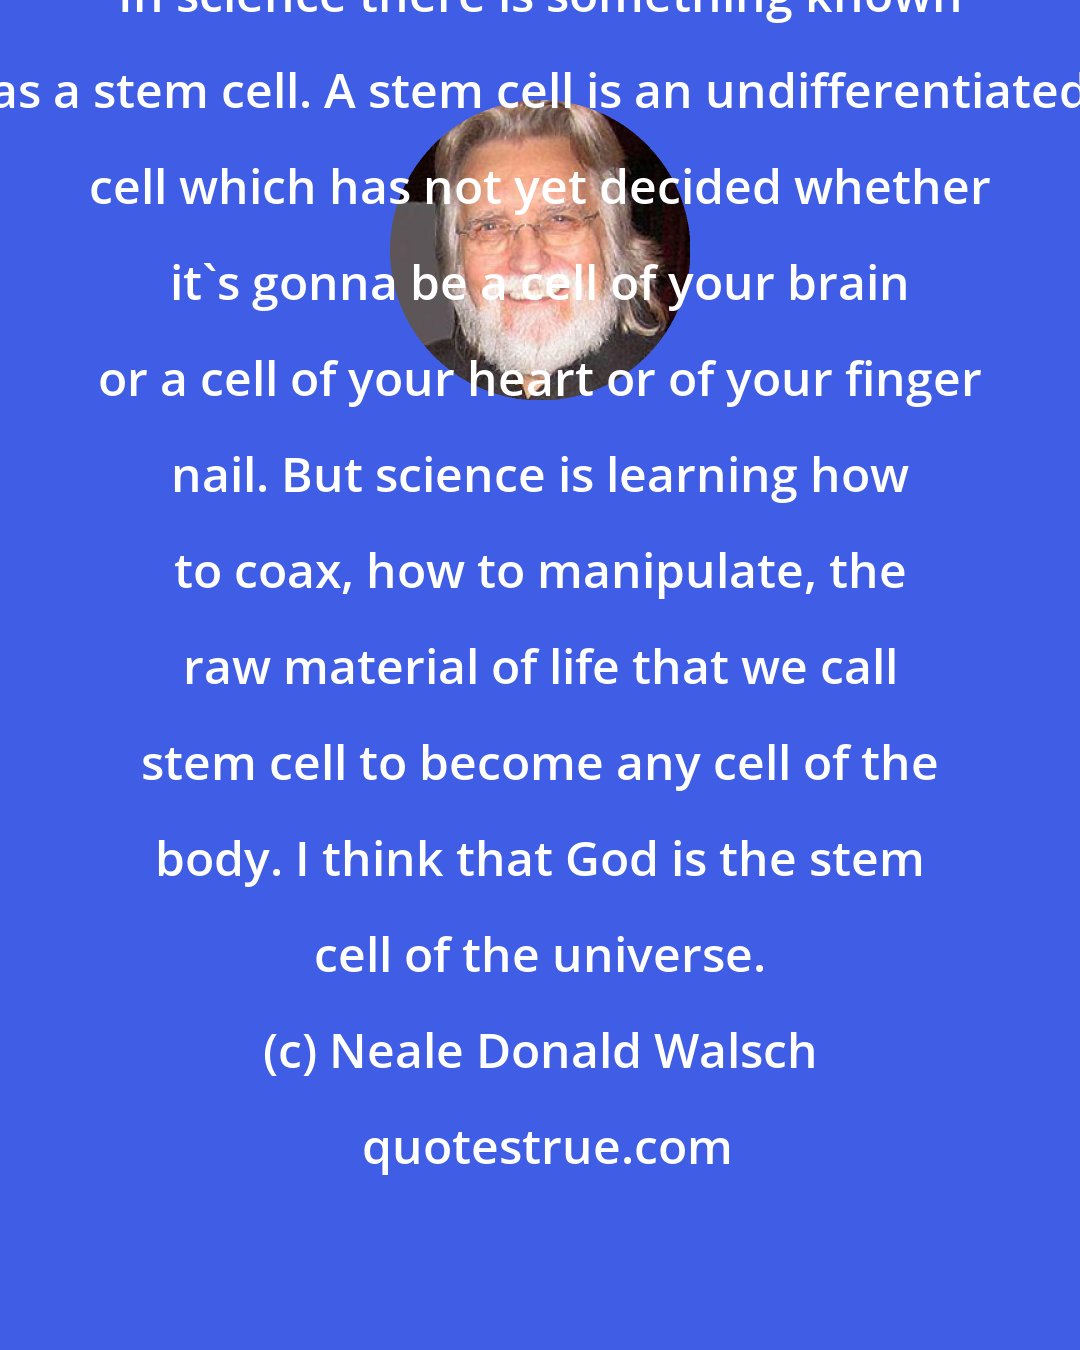 Neale Donald Walsch: In science there is something known as a stem cell. A stem cell is an undifferentiated cell which has not yet decided whether it's gonna be a cell of your brain or a cell of your heart or of your finger nail. But science is learning how to coax, how to manipulate, the raw material of life that we call stem cell to become any cell of the body. I think that God is the stem cell of the universe.